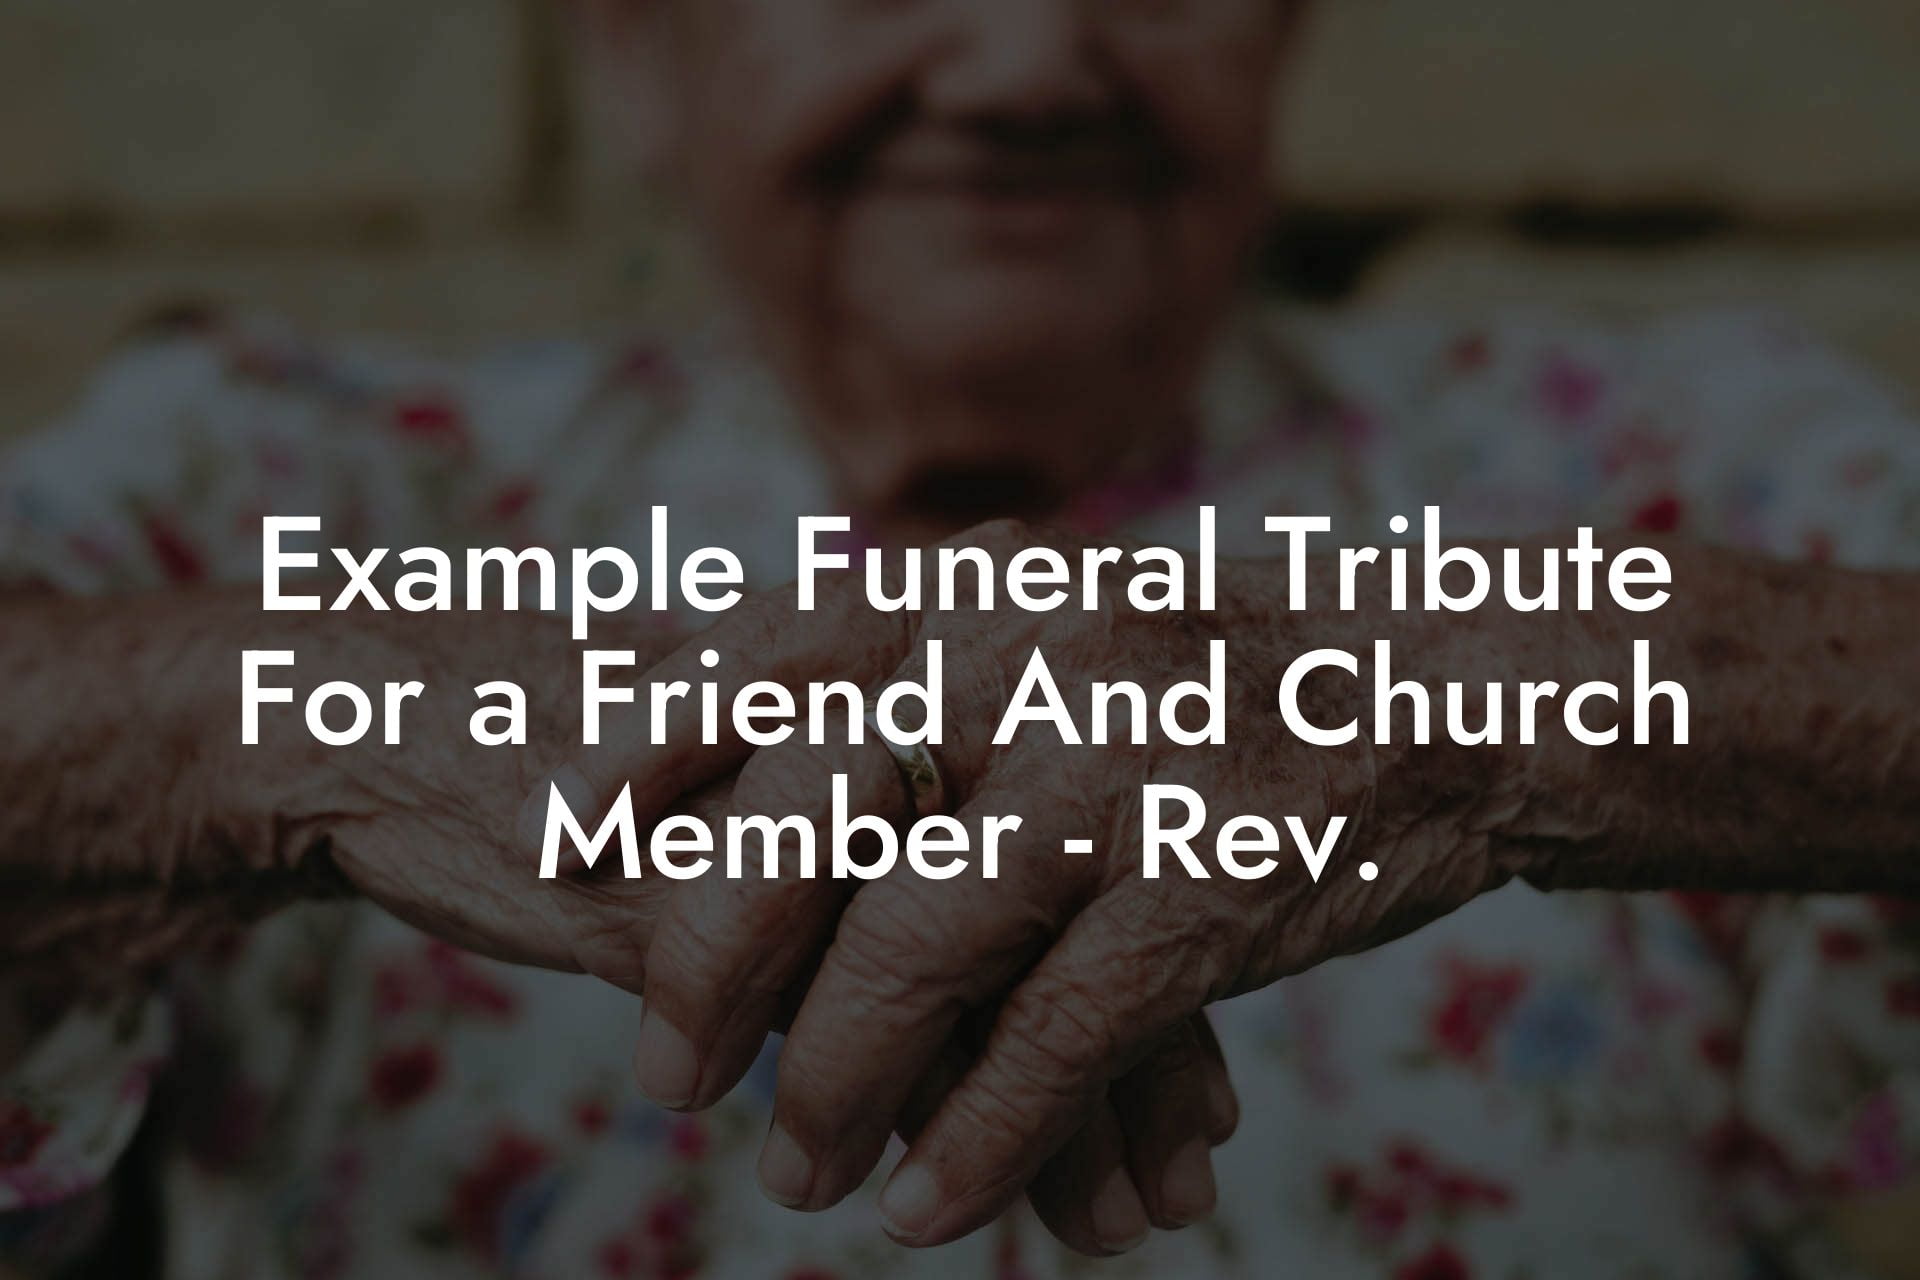 Example Funeral Tribute For a Friend And Church Member   Rev.